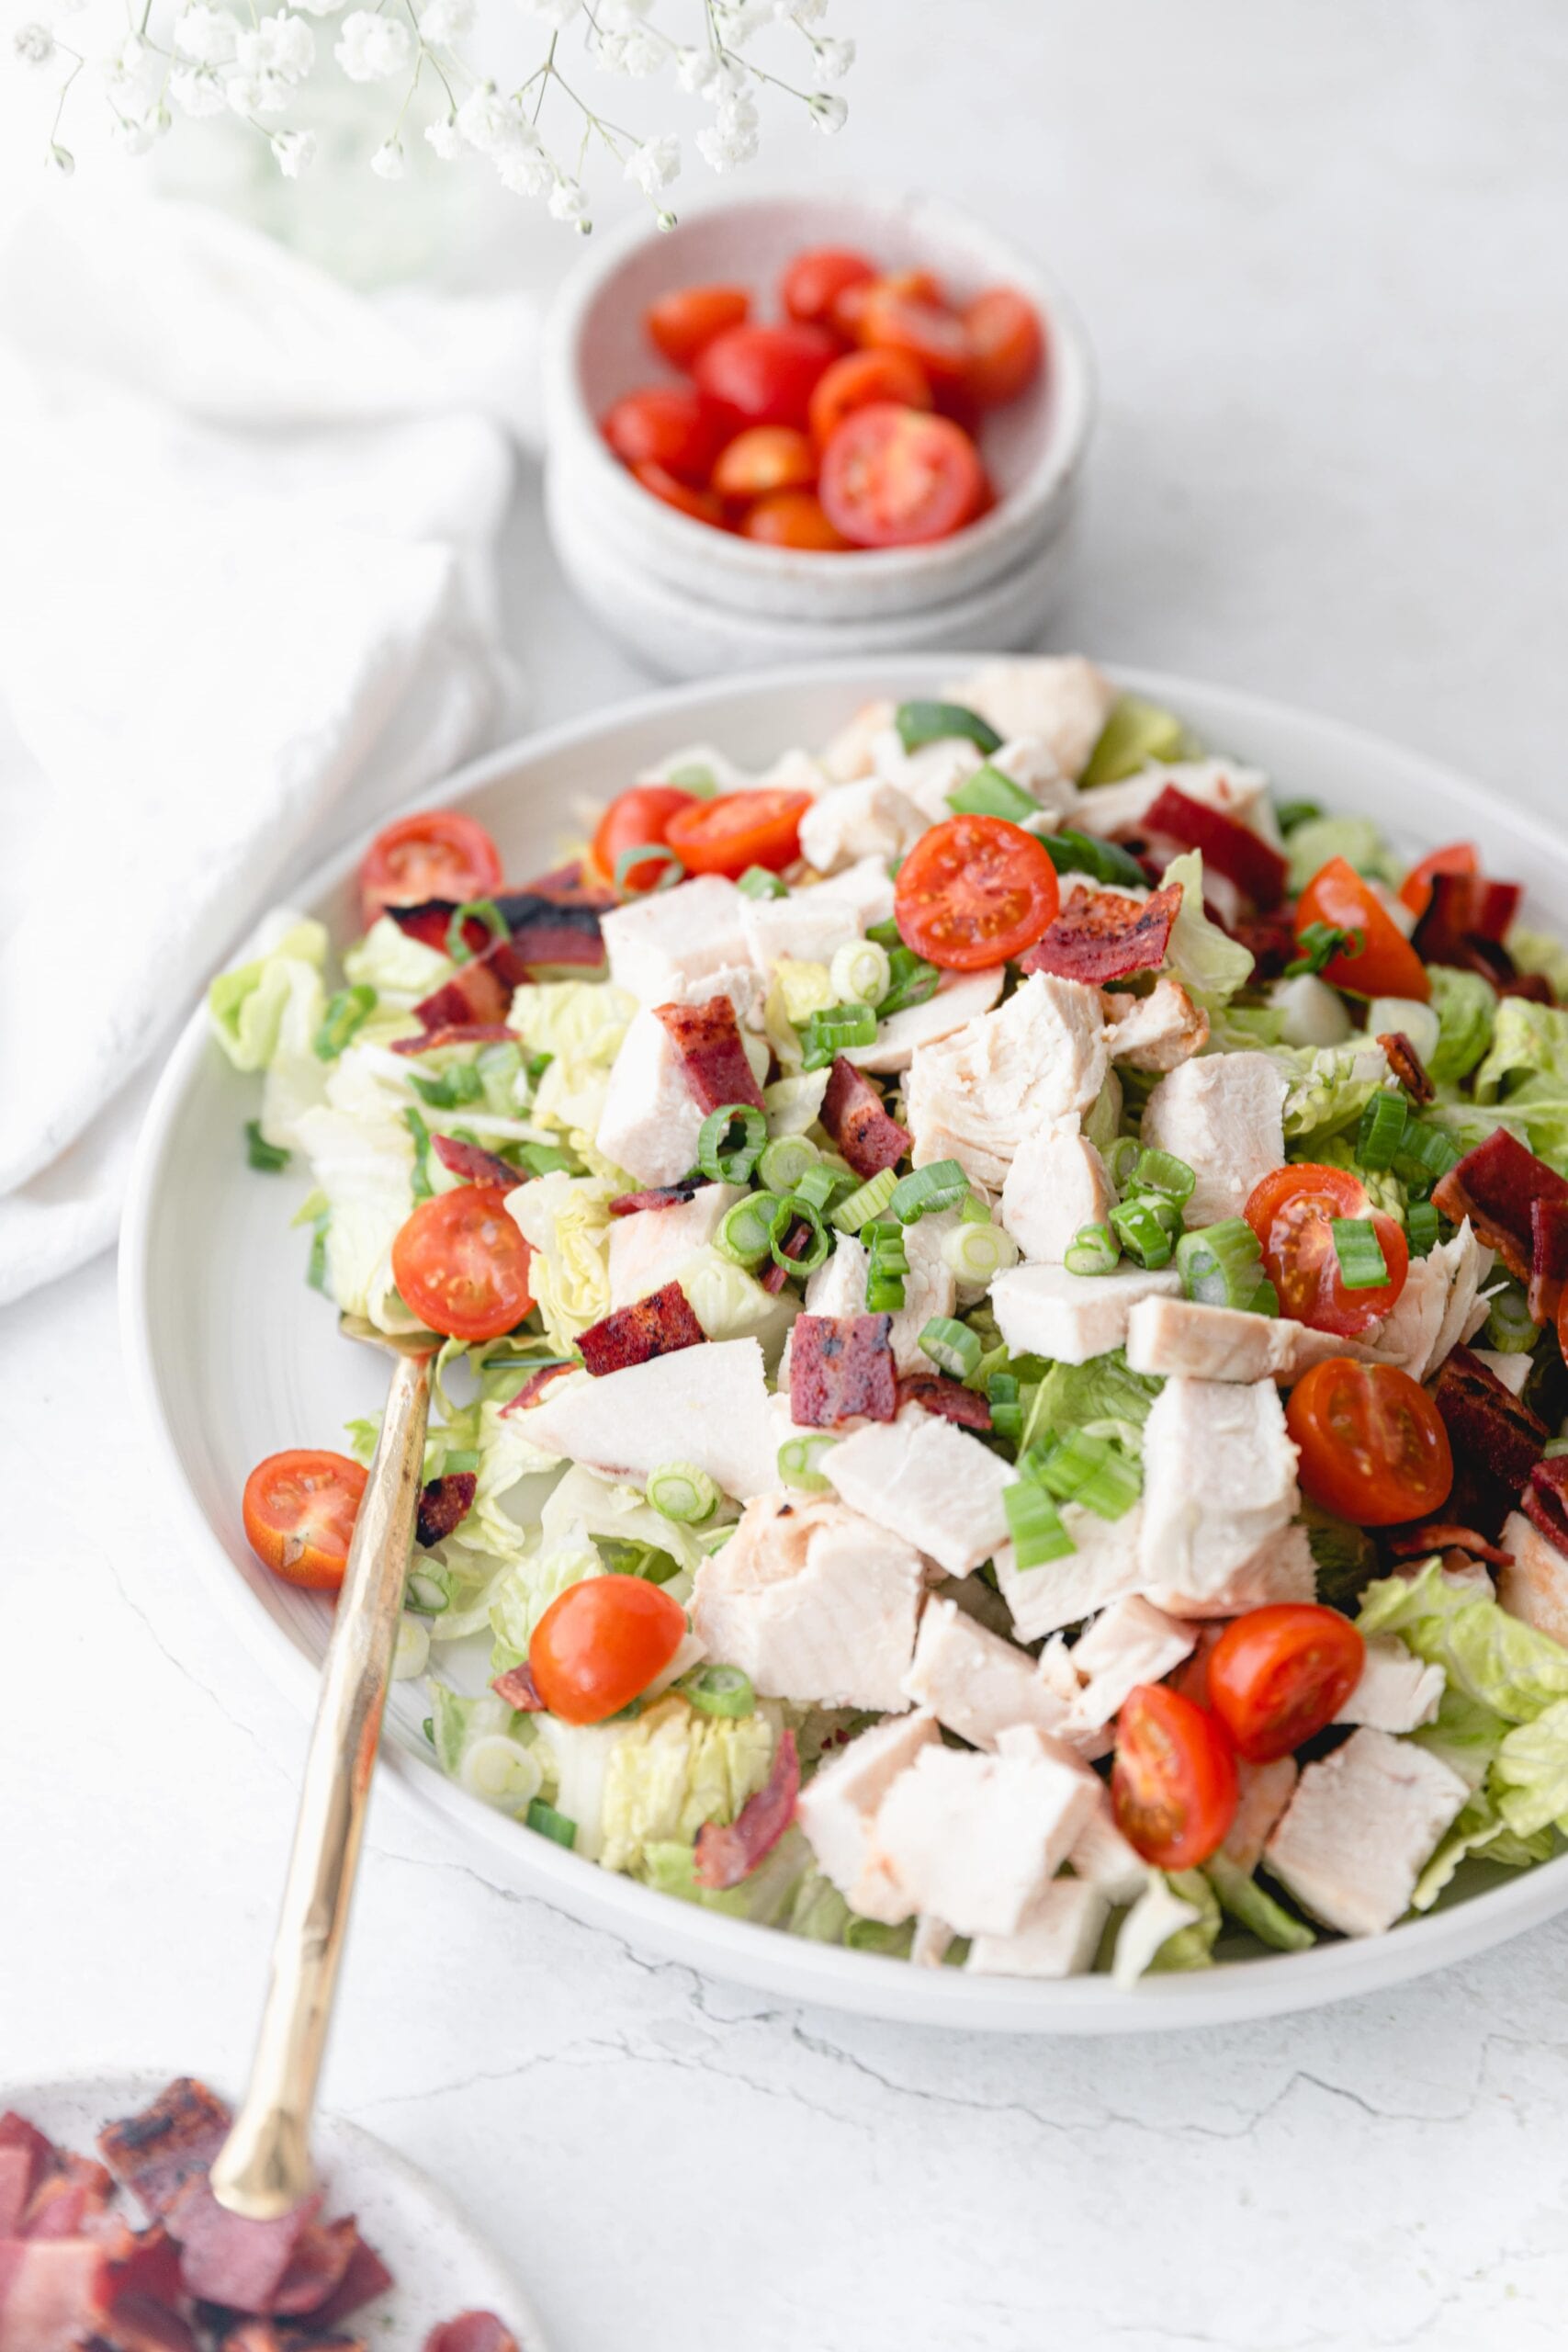 BLT Chicken Salad - An Easy Low Carb, Keto Meal!